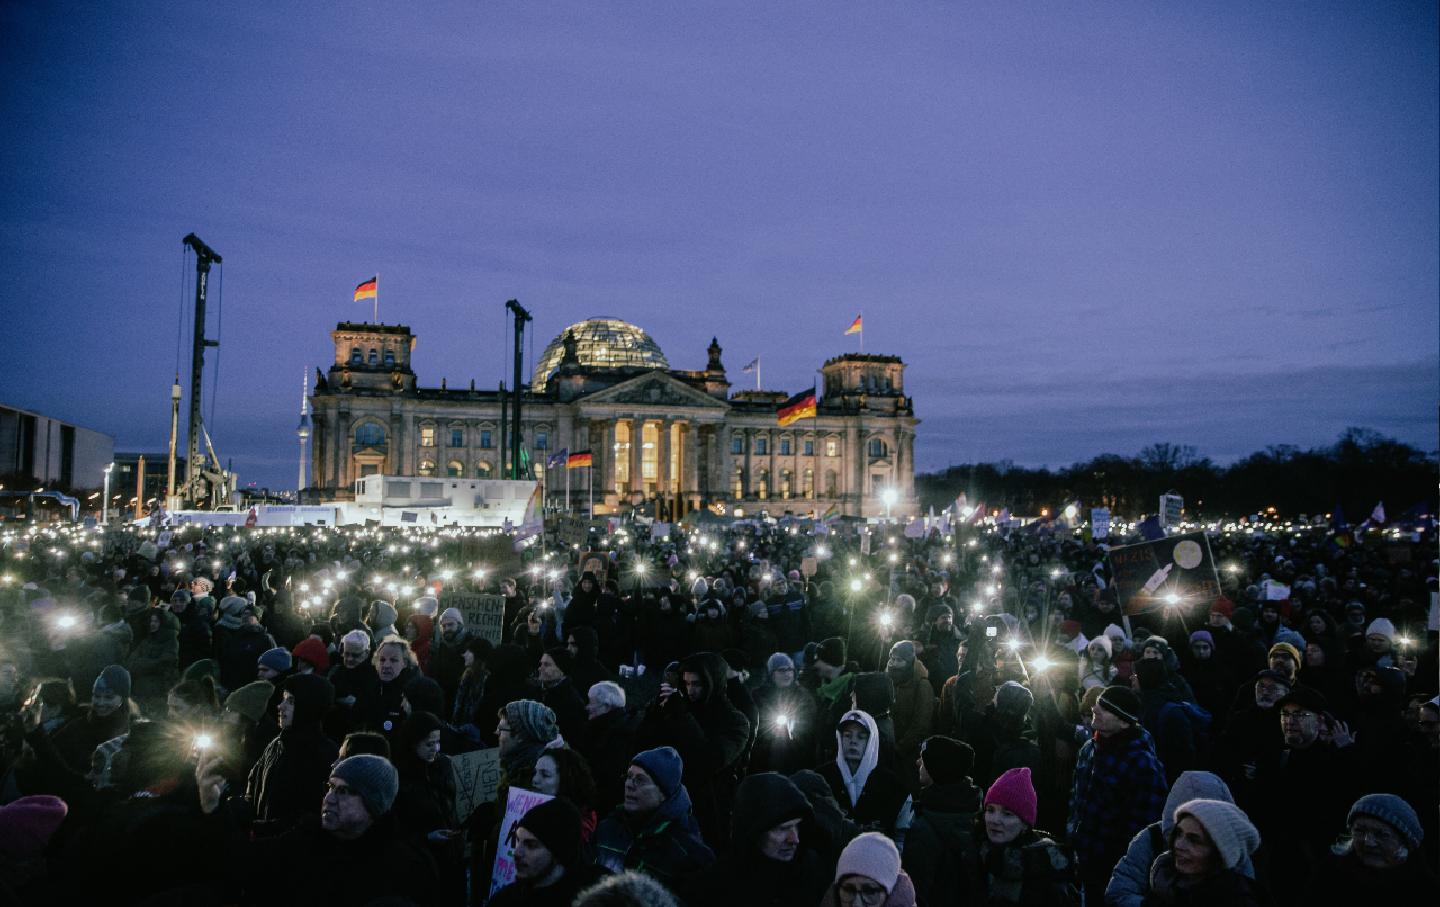 Crowd of 350,000 gathers in front of the Bundestag in Berlin.